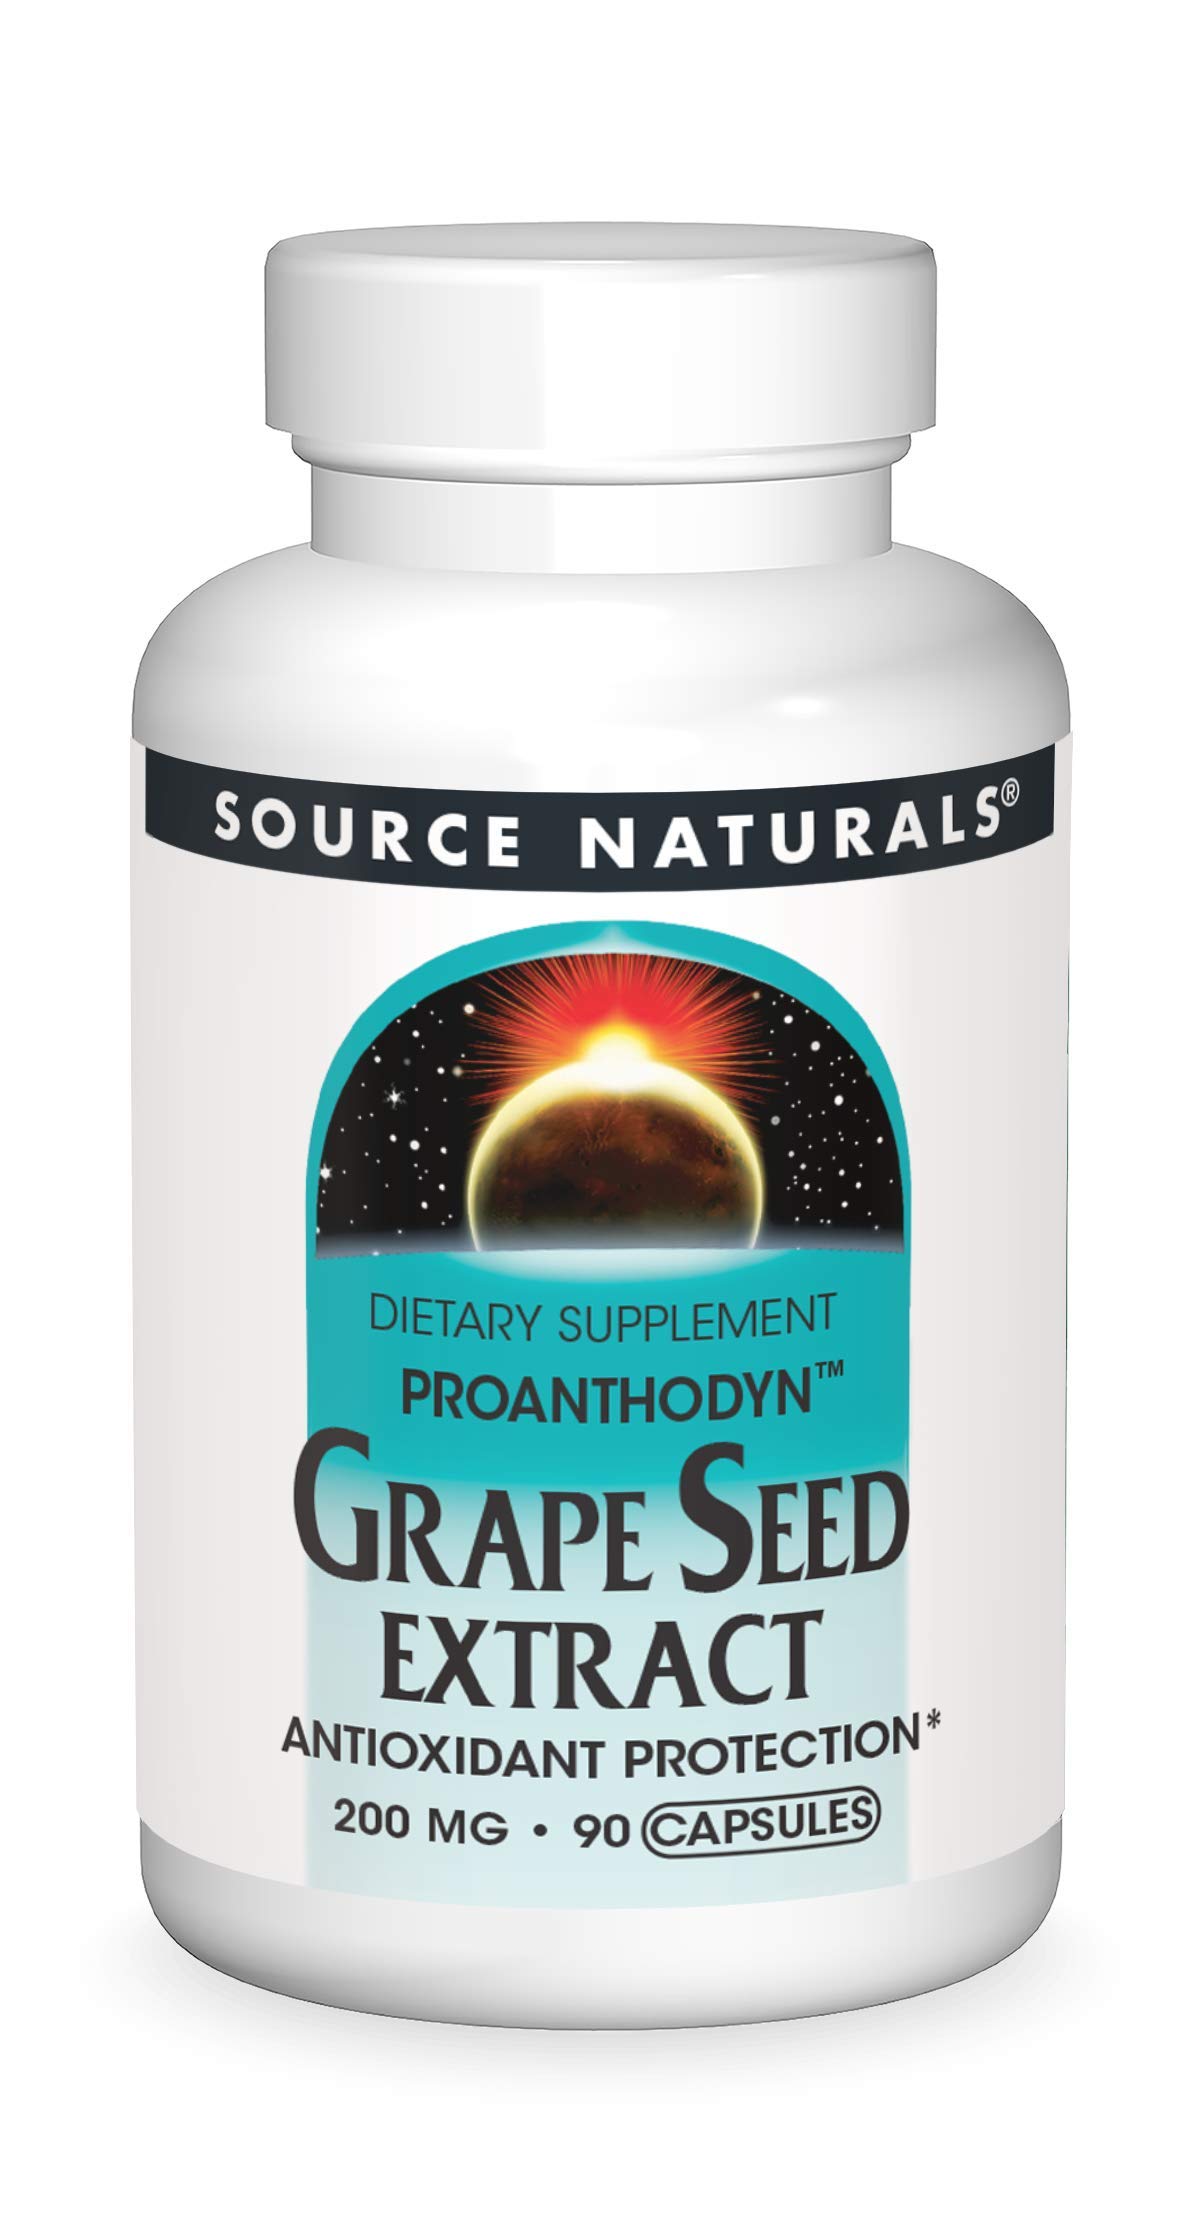 Source Naturals Grape Seed Extract, Proanthodyn 200 mg Antioxidant Protection & Supports Healthy Aging Brain - 90 Capsules